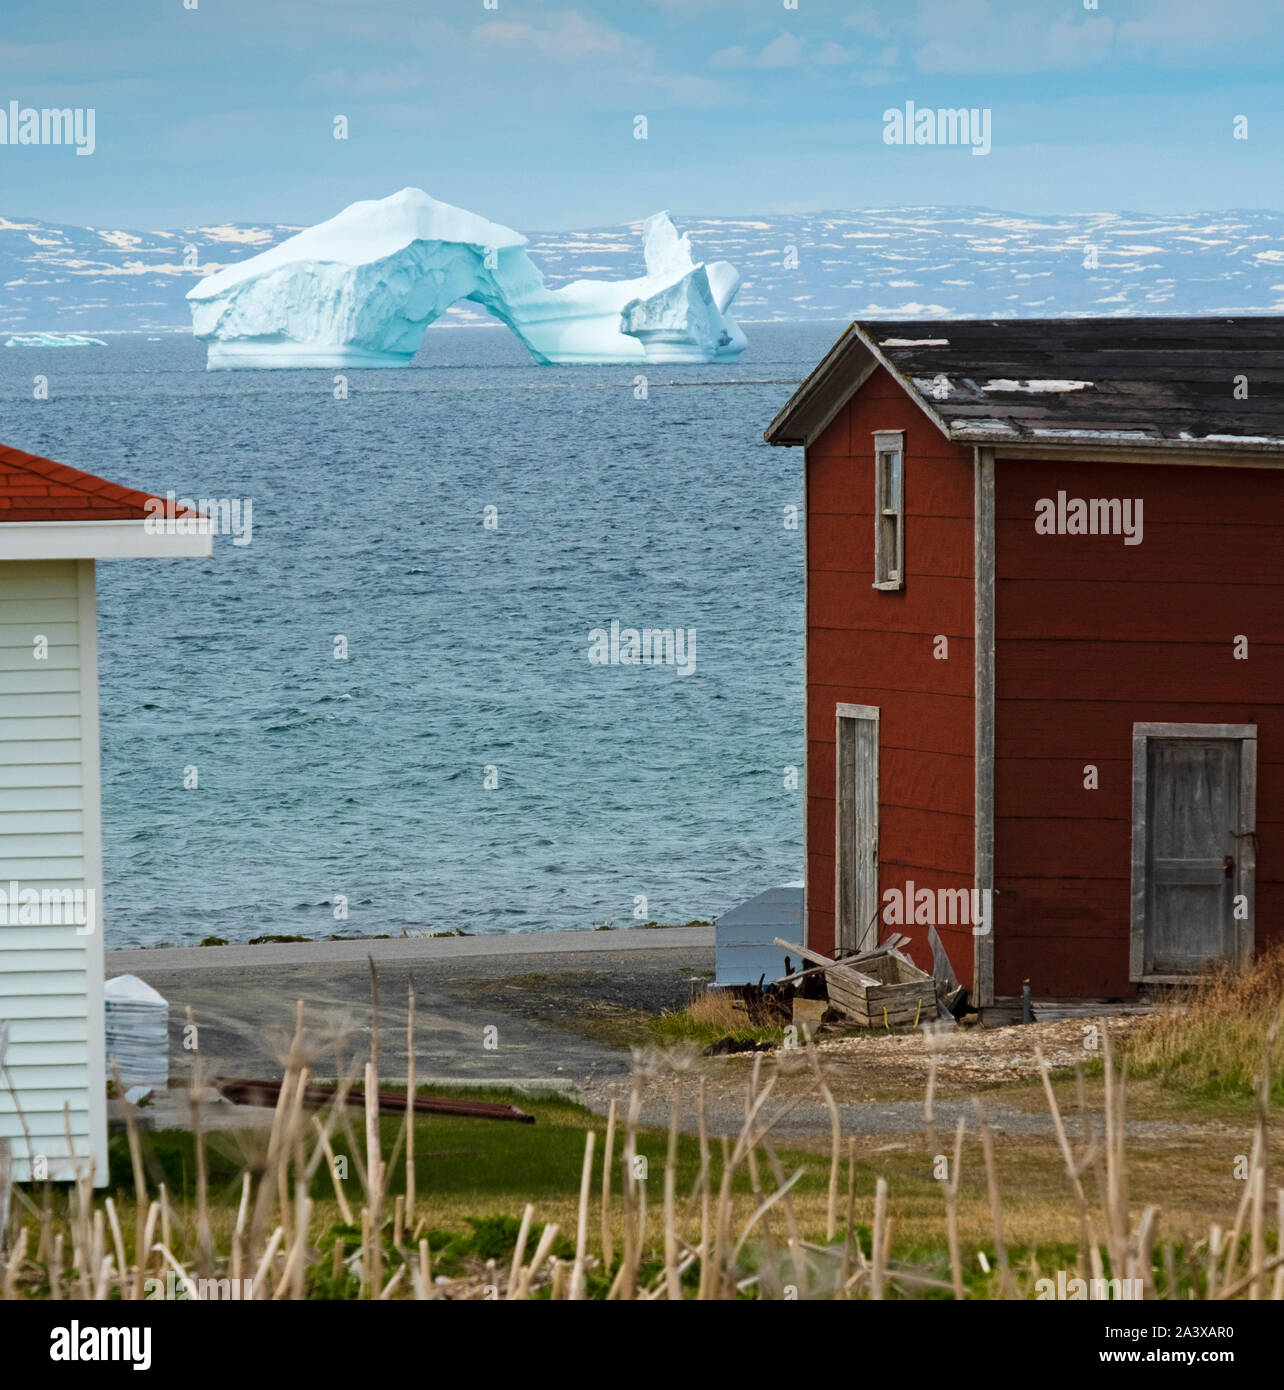 Iceberg at Green Island Cove with red barn in foreground, Newfoundland Stock Photo